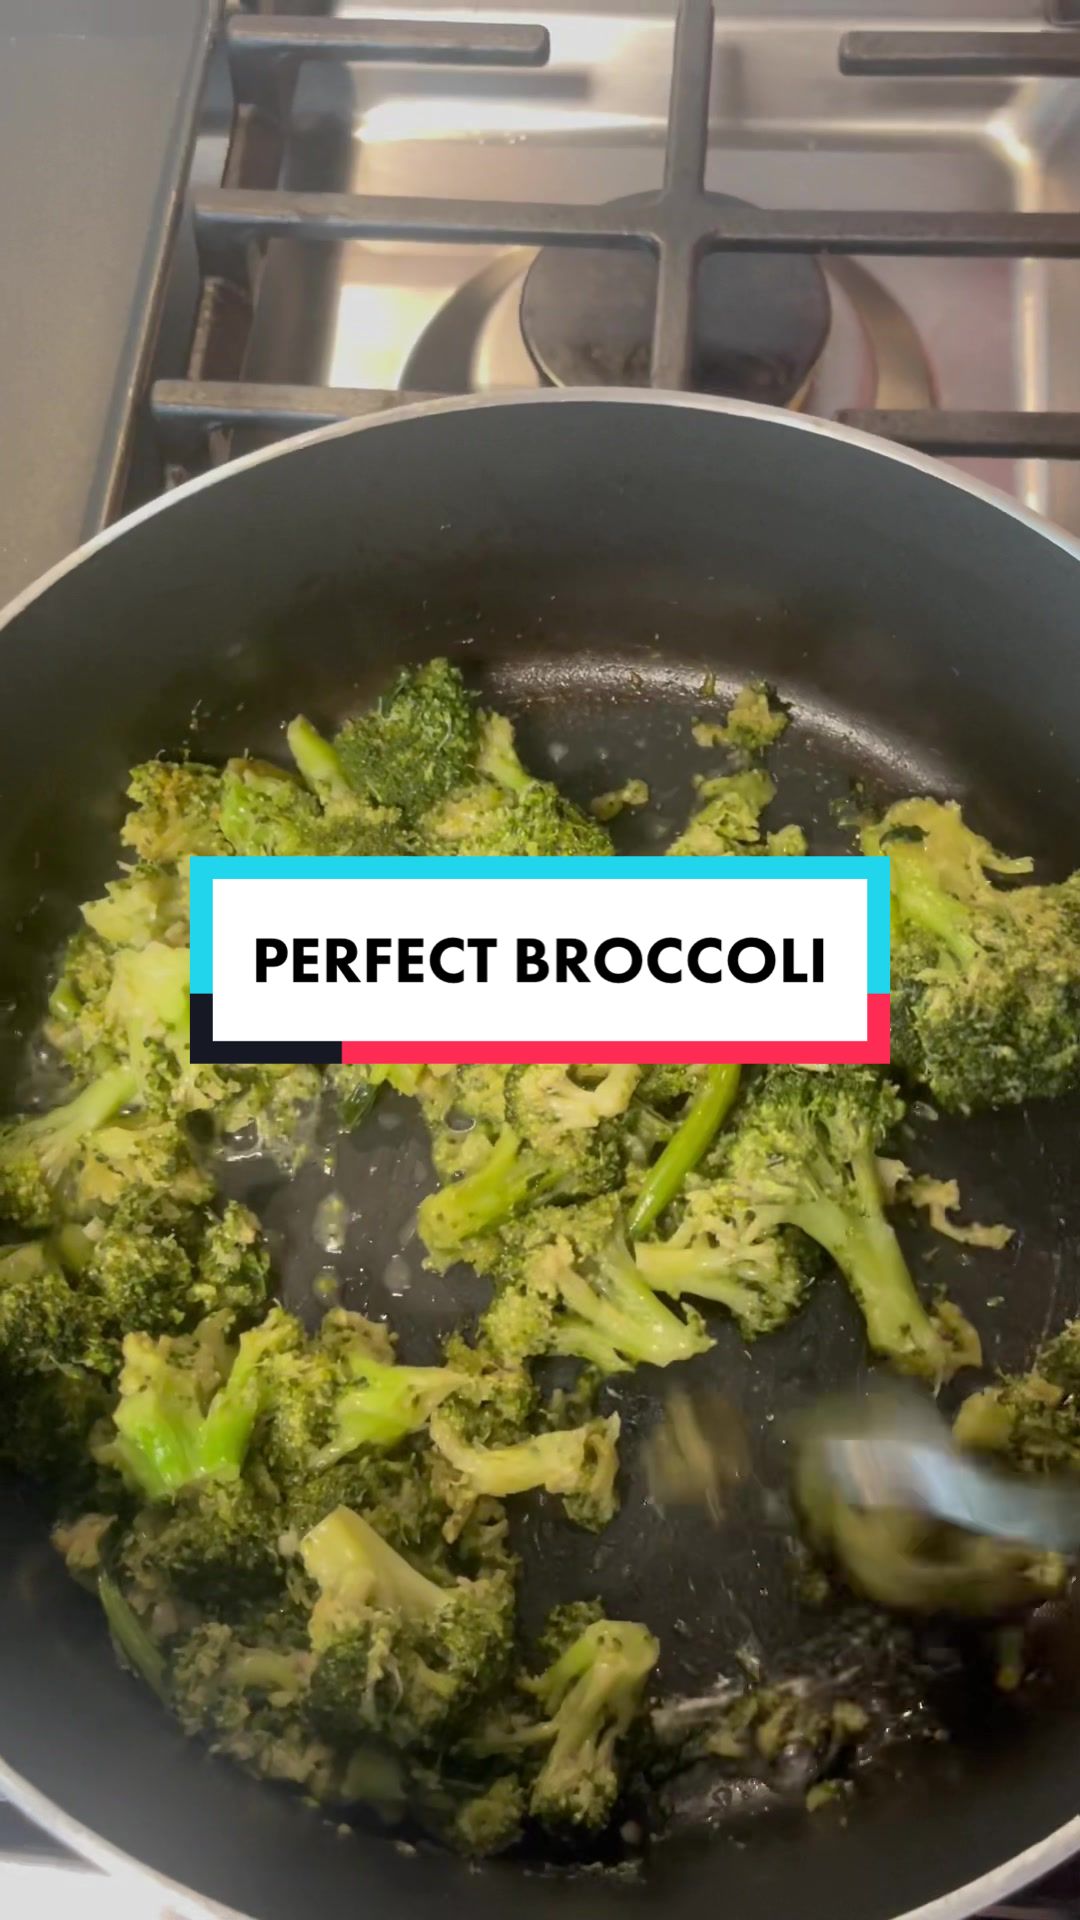 @HOW TO MAKE THE PERFECT BROCCOLI lemme know how yours came o...